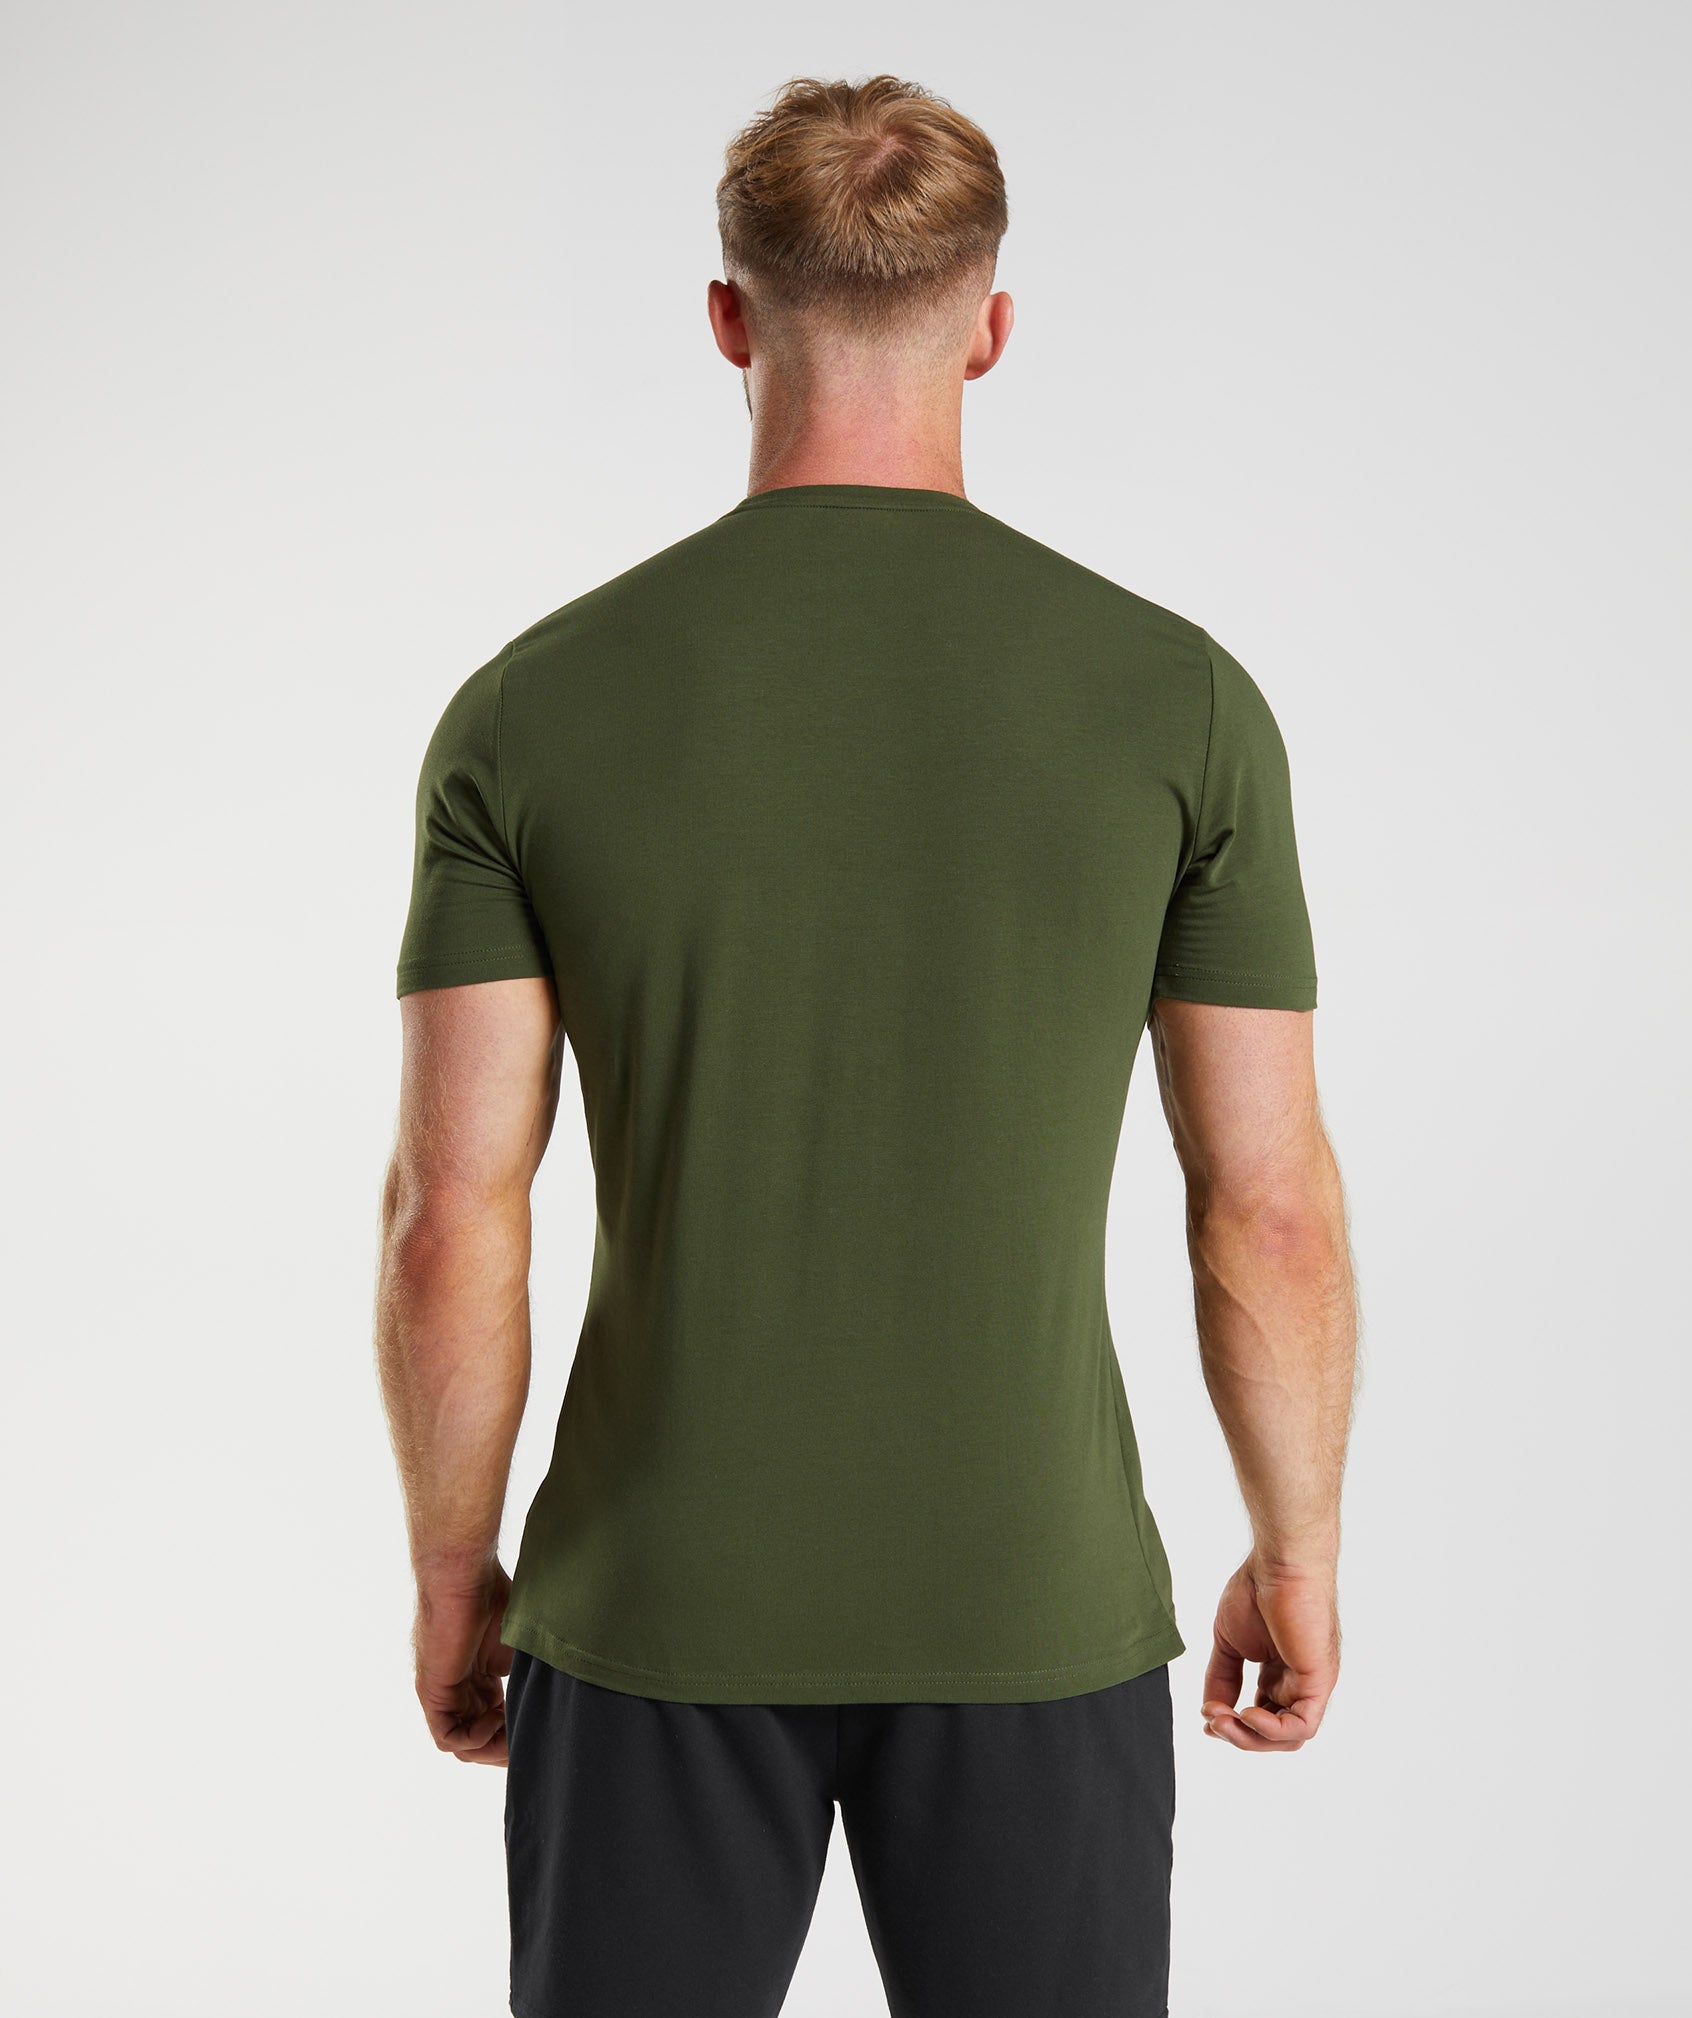 Essential T-Shirt in Moss Olive - view 2